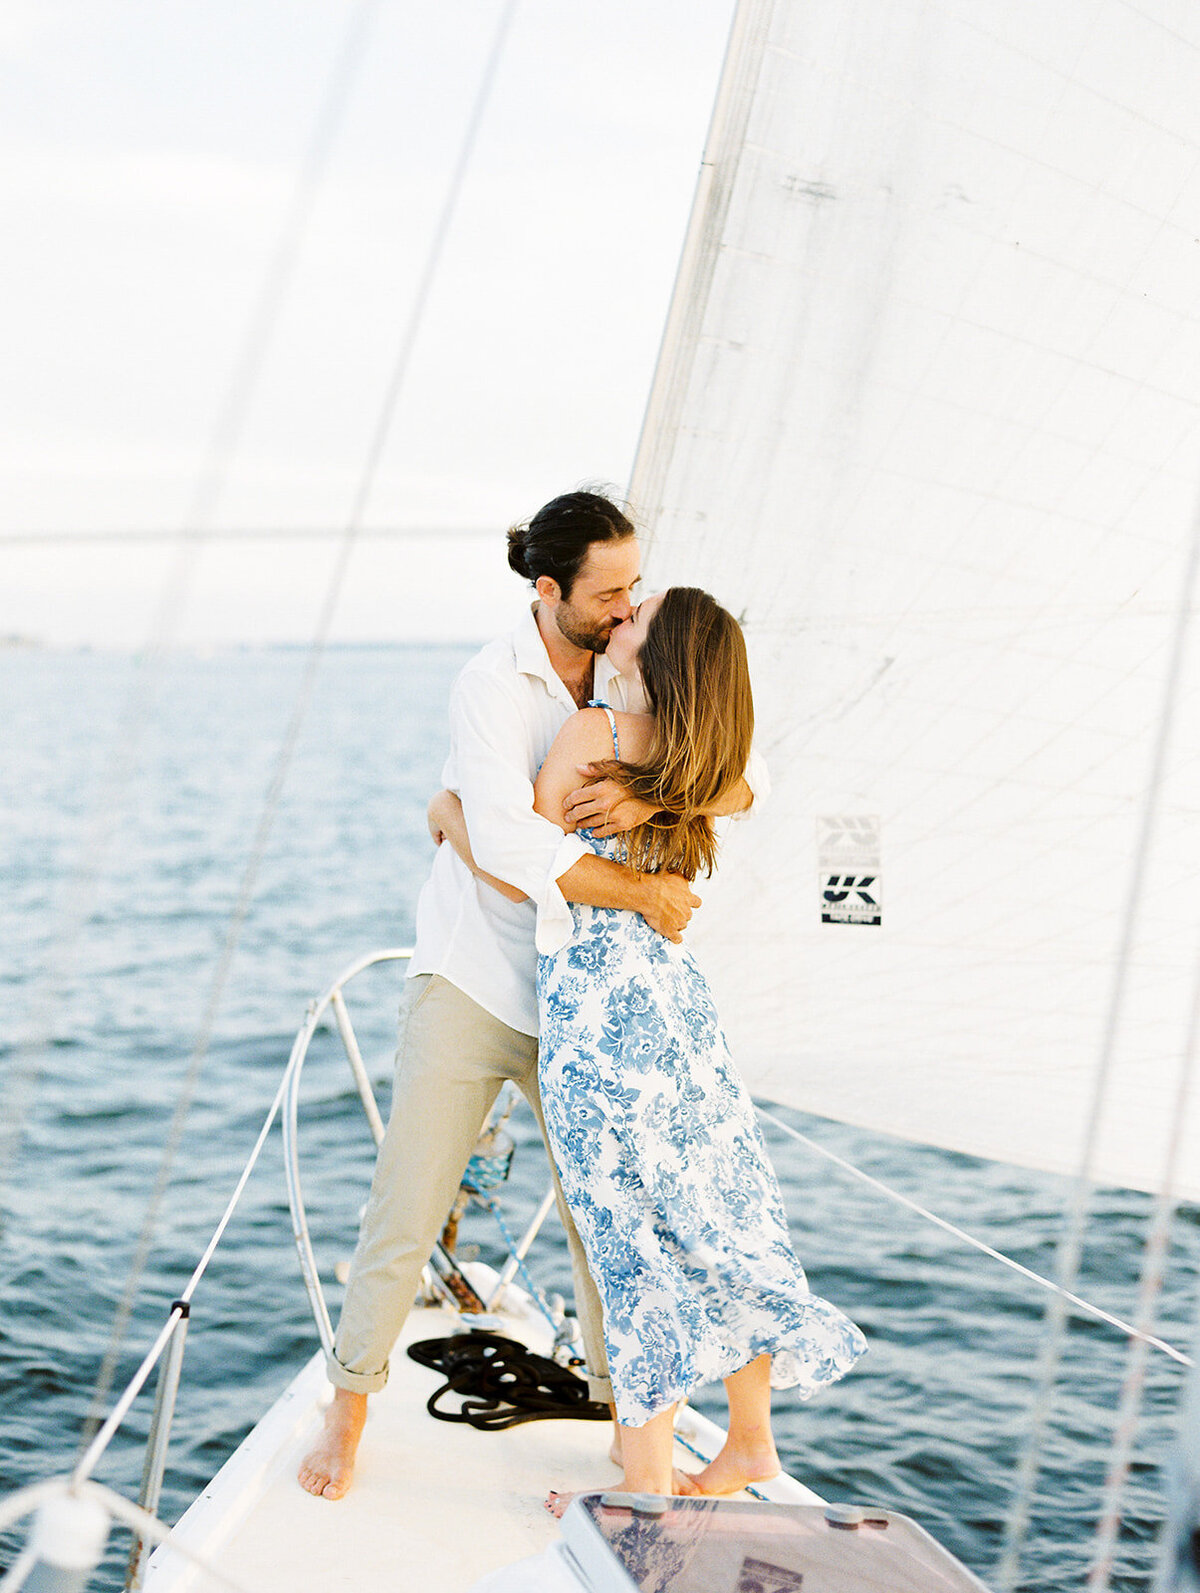 Charleston harbor spring sunset engagement session. Girl in white and blue dress. Guy in khakis, no shoes, and white button up shirt. Charleston film wedding photographer.